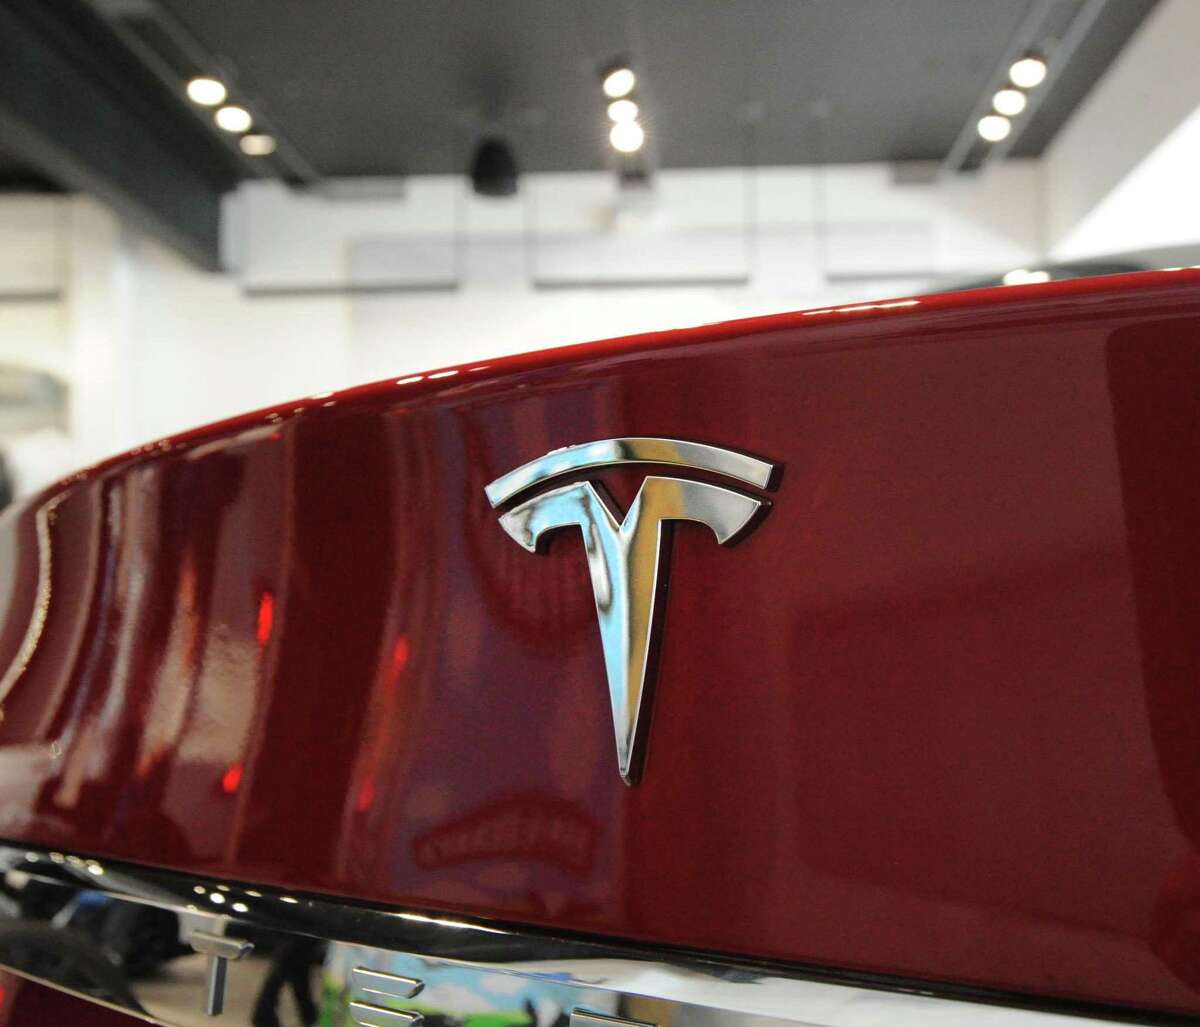 Tesla would be allowed to sell its electric vehicles direct to consumers in Connecticut under a bill just introduced this week in the Legislature. Tesla has a showroom in Greenwich, where would-be customers can learned about how to place orders for the vehicles.